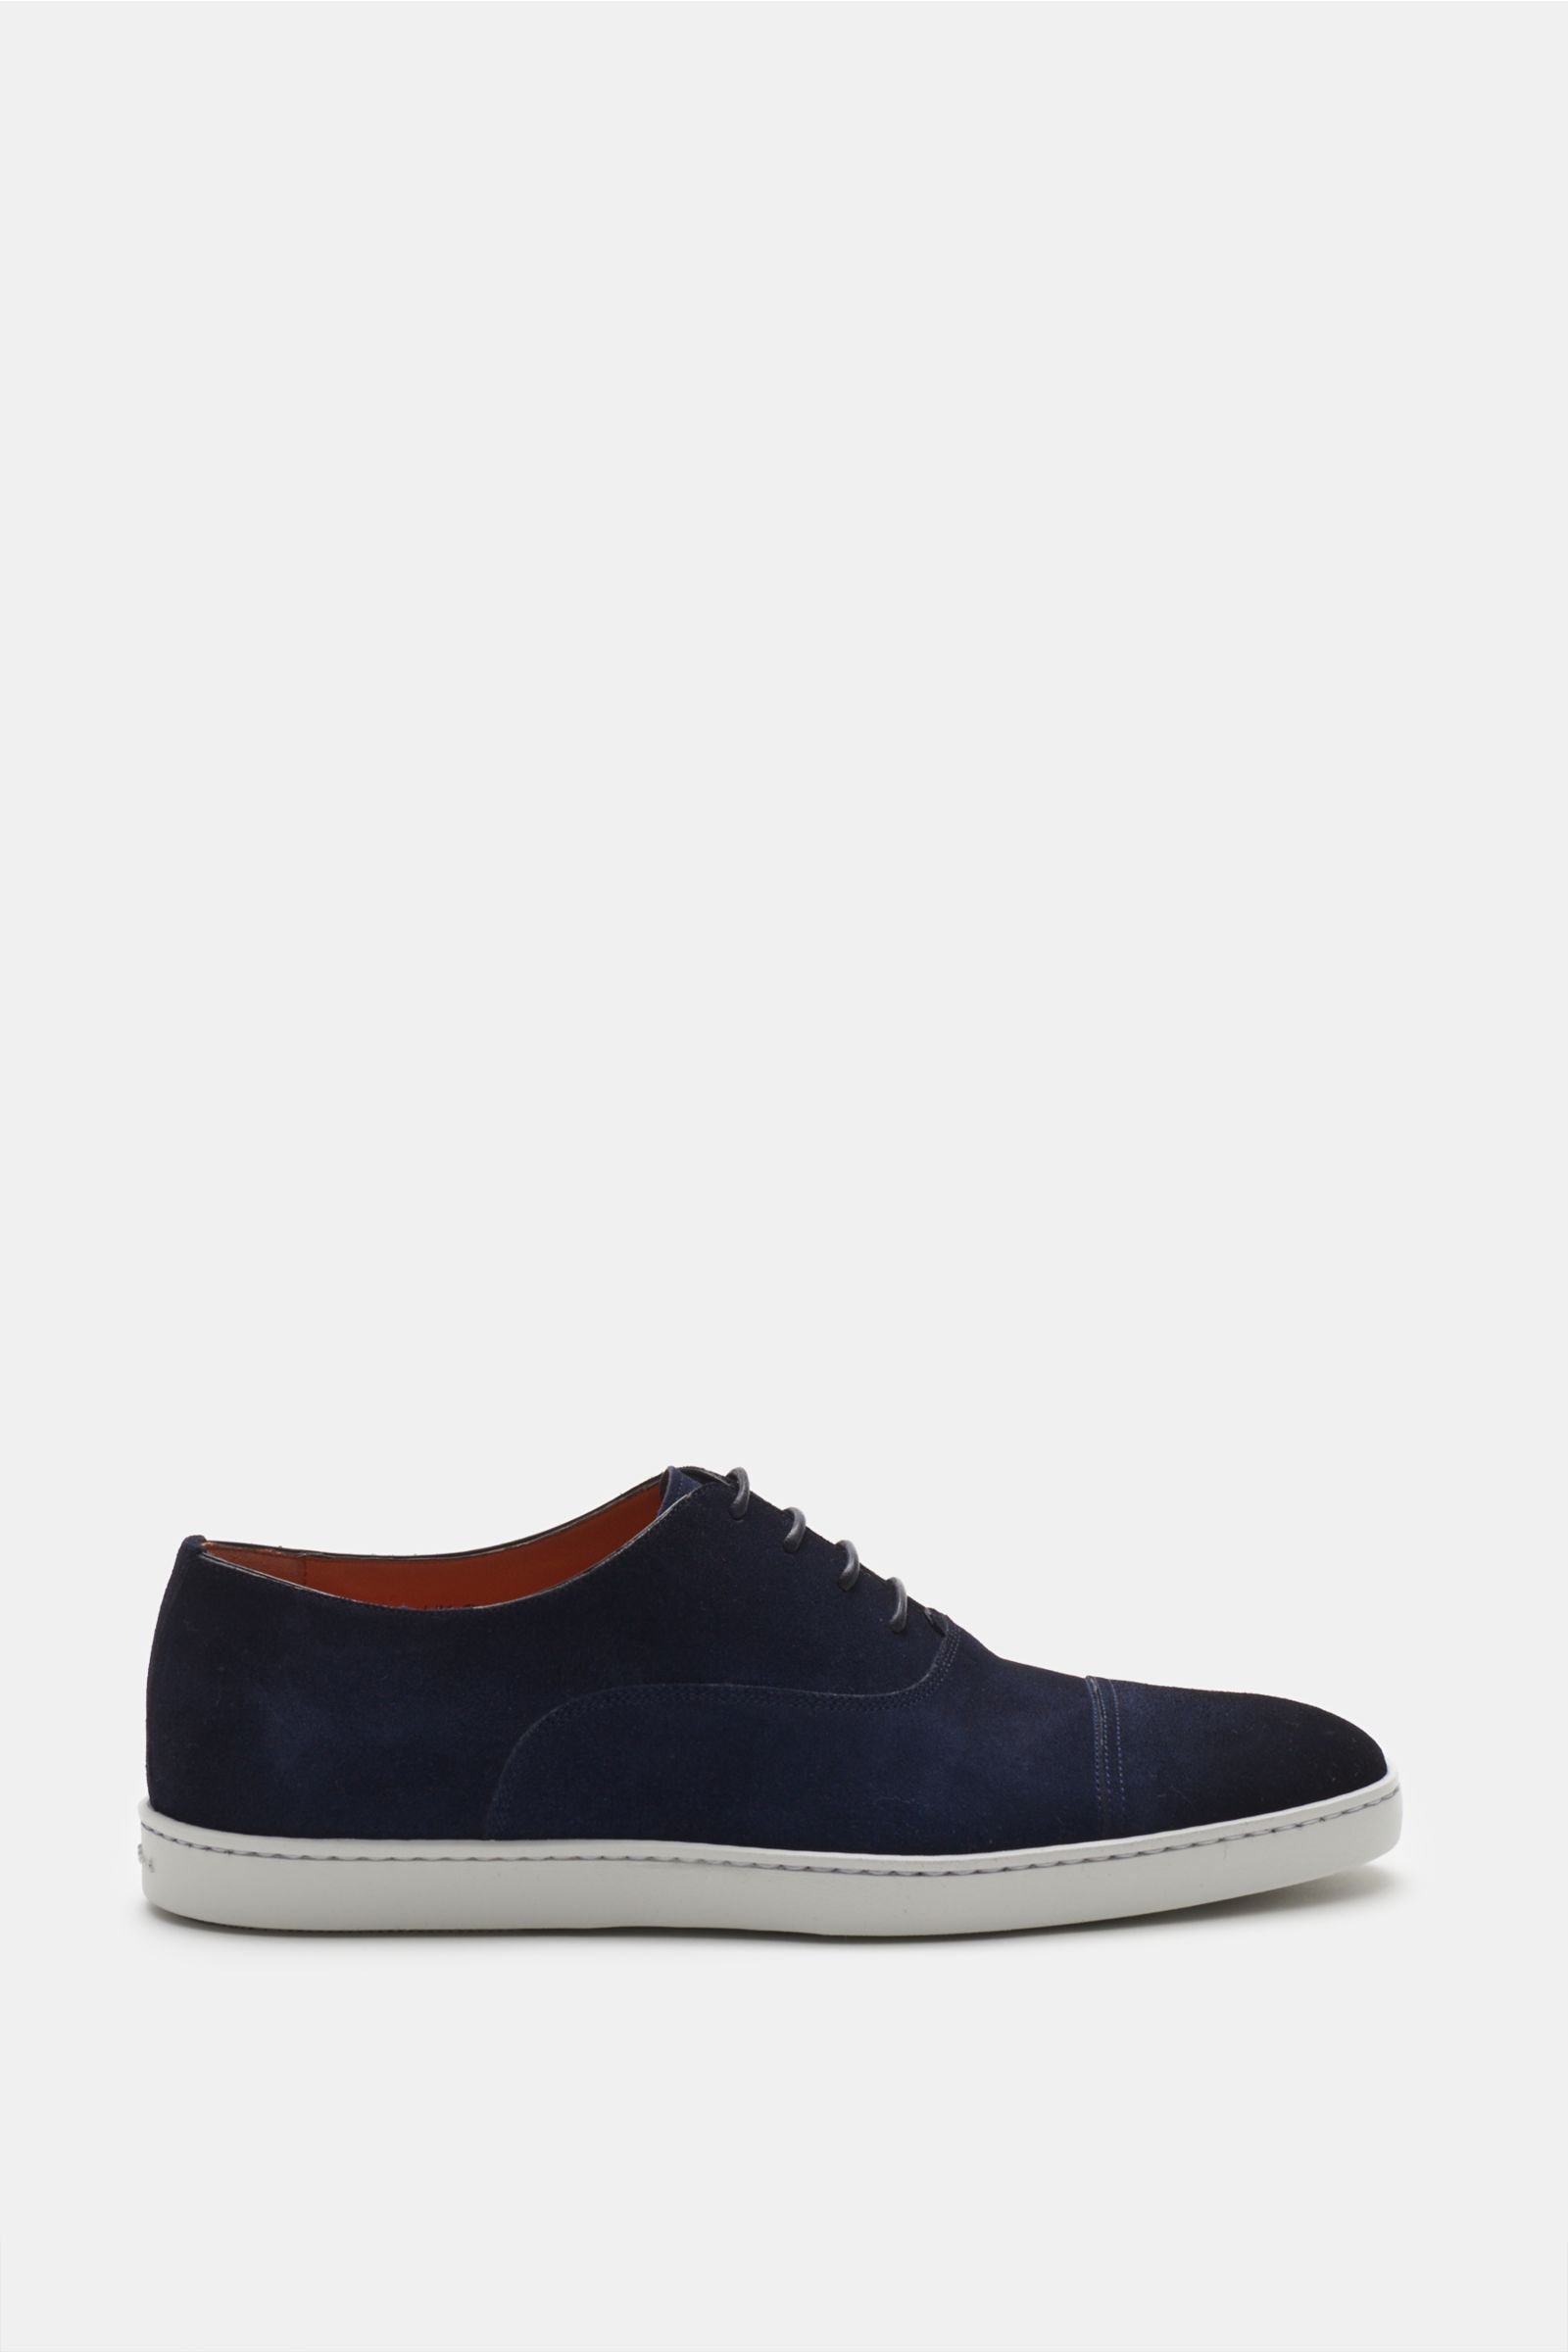 Oxford shoes navy